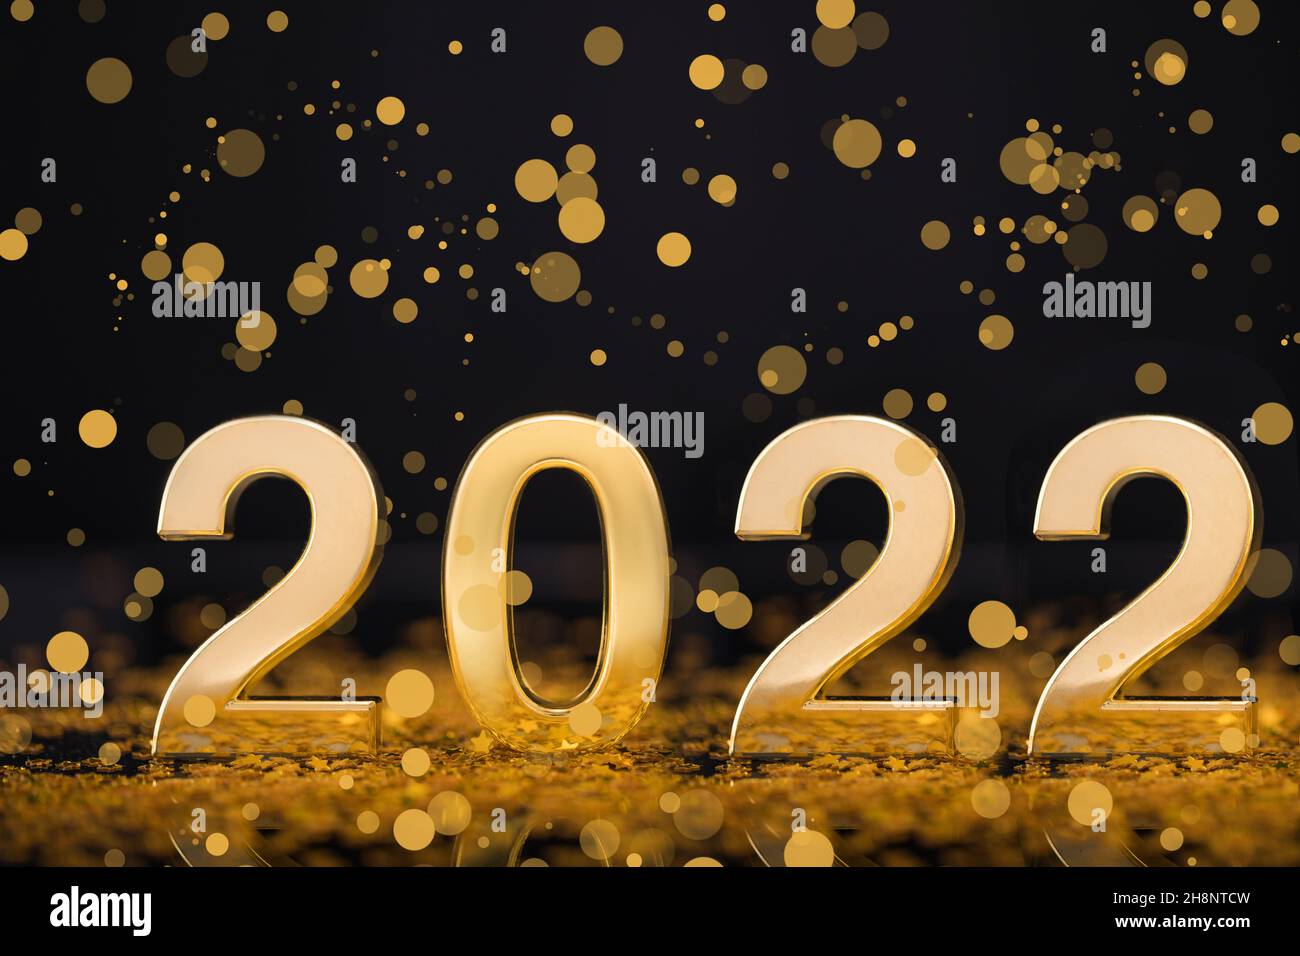 Happy New Year 2022 background with gold light background Stock ...